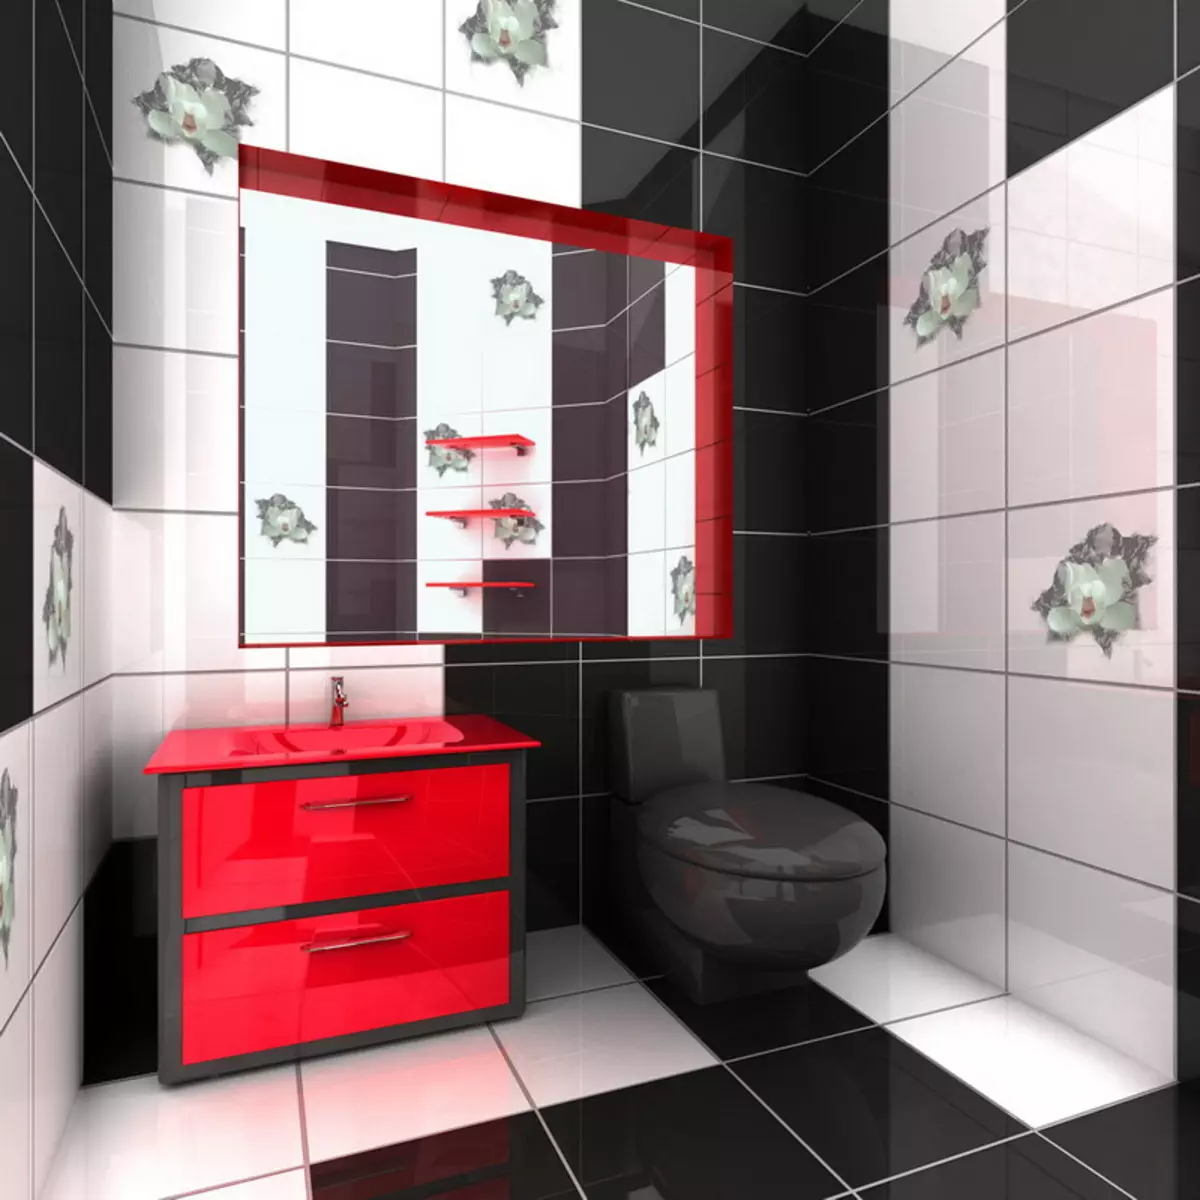 Black toilet (67 photos): toilet design in black and white colors, selection of a dark color toilet in an apartment, finishing with black and red tiles 10501_15